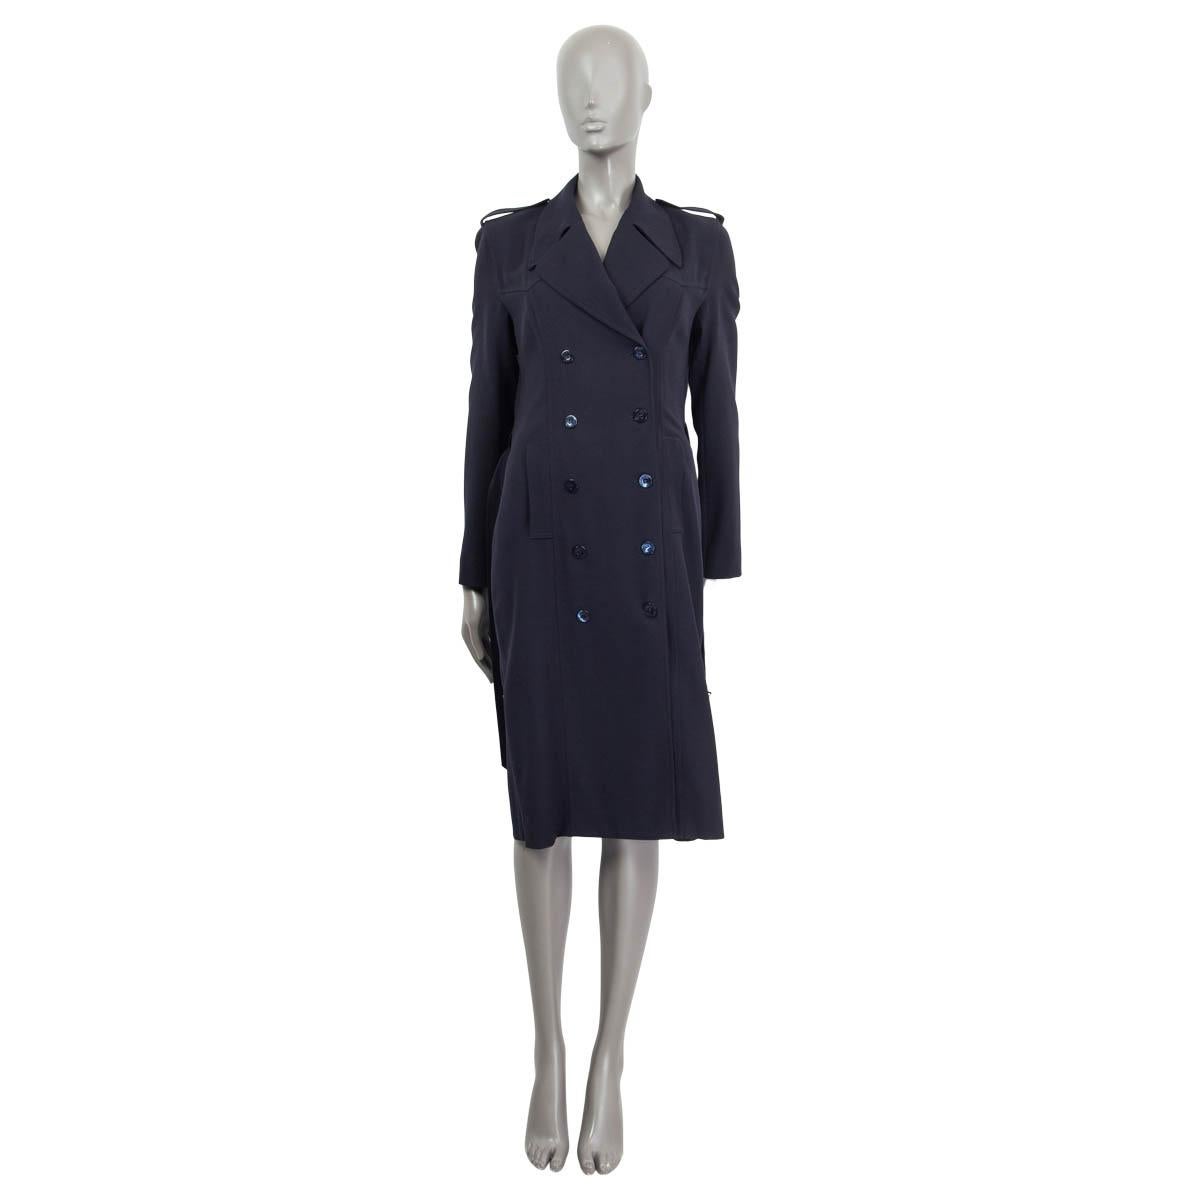 100% authentic Gucci trench coat in navy blue wool (100%). Comes with a matching belt and two slit pockets in the front. Embellished with epaulettes and opens with ten Gucci buttons on the front. Unlined. Has been worn and is in excellent condition.